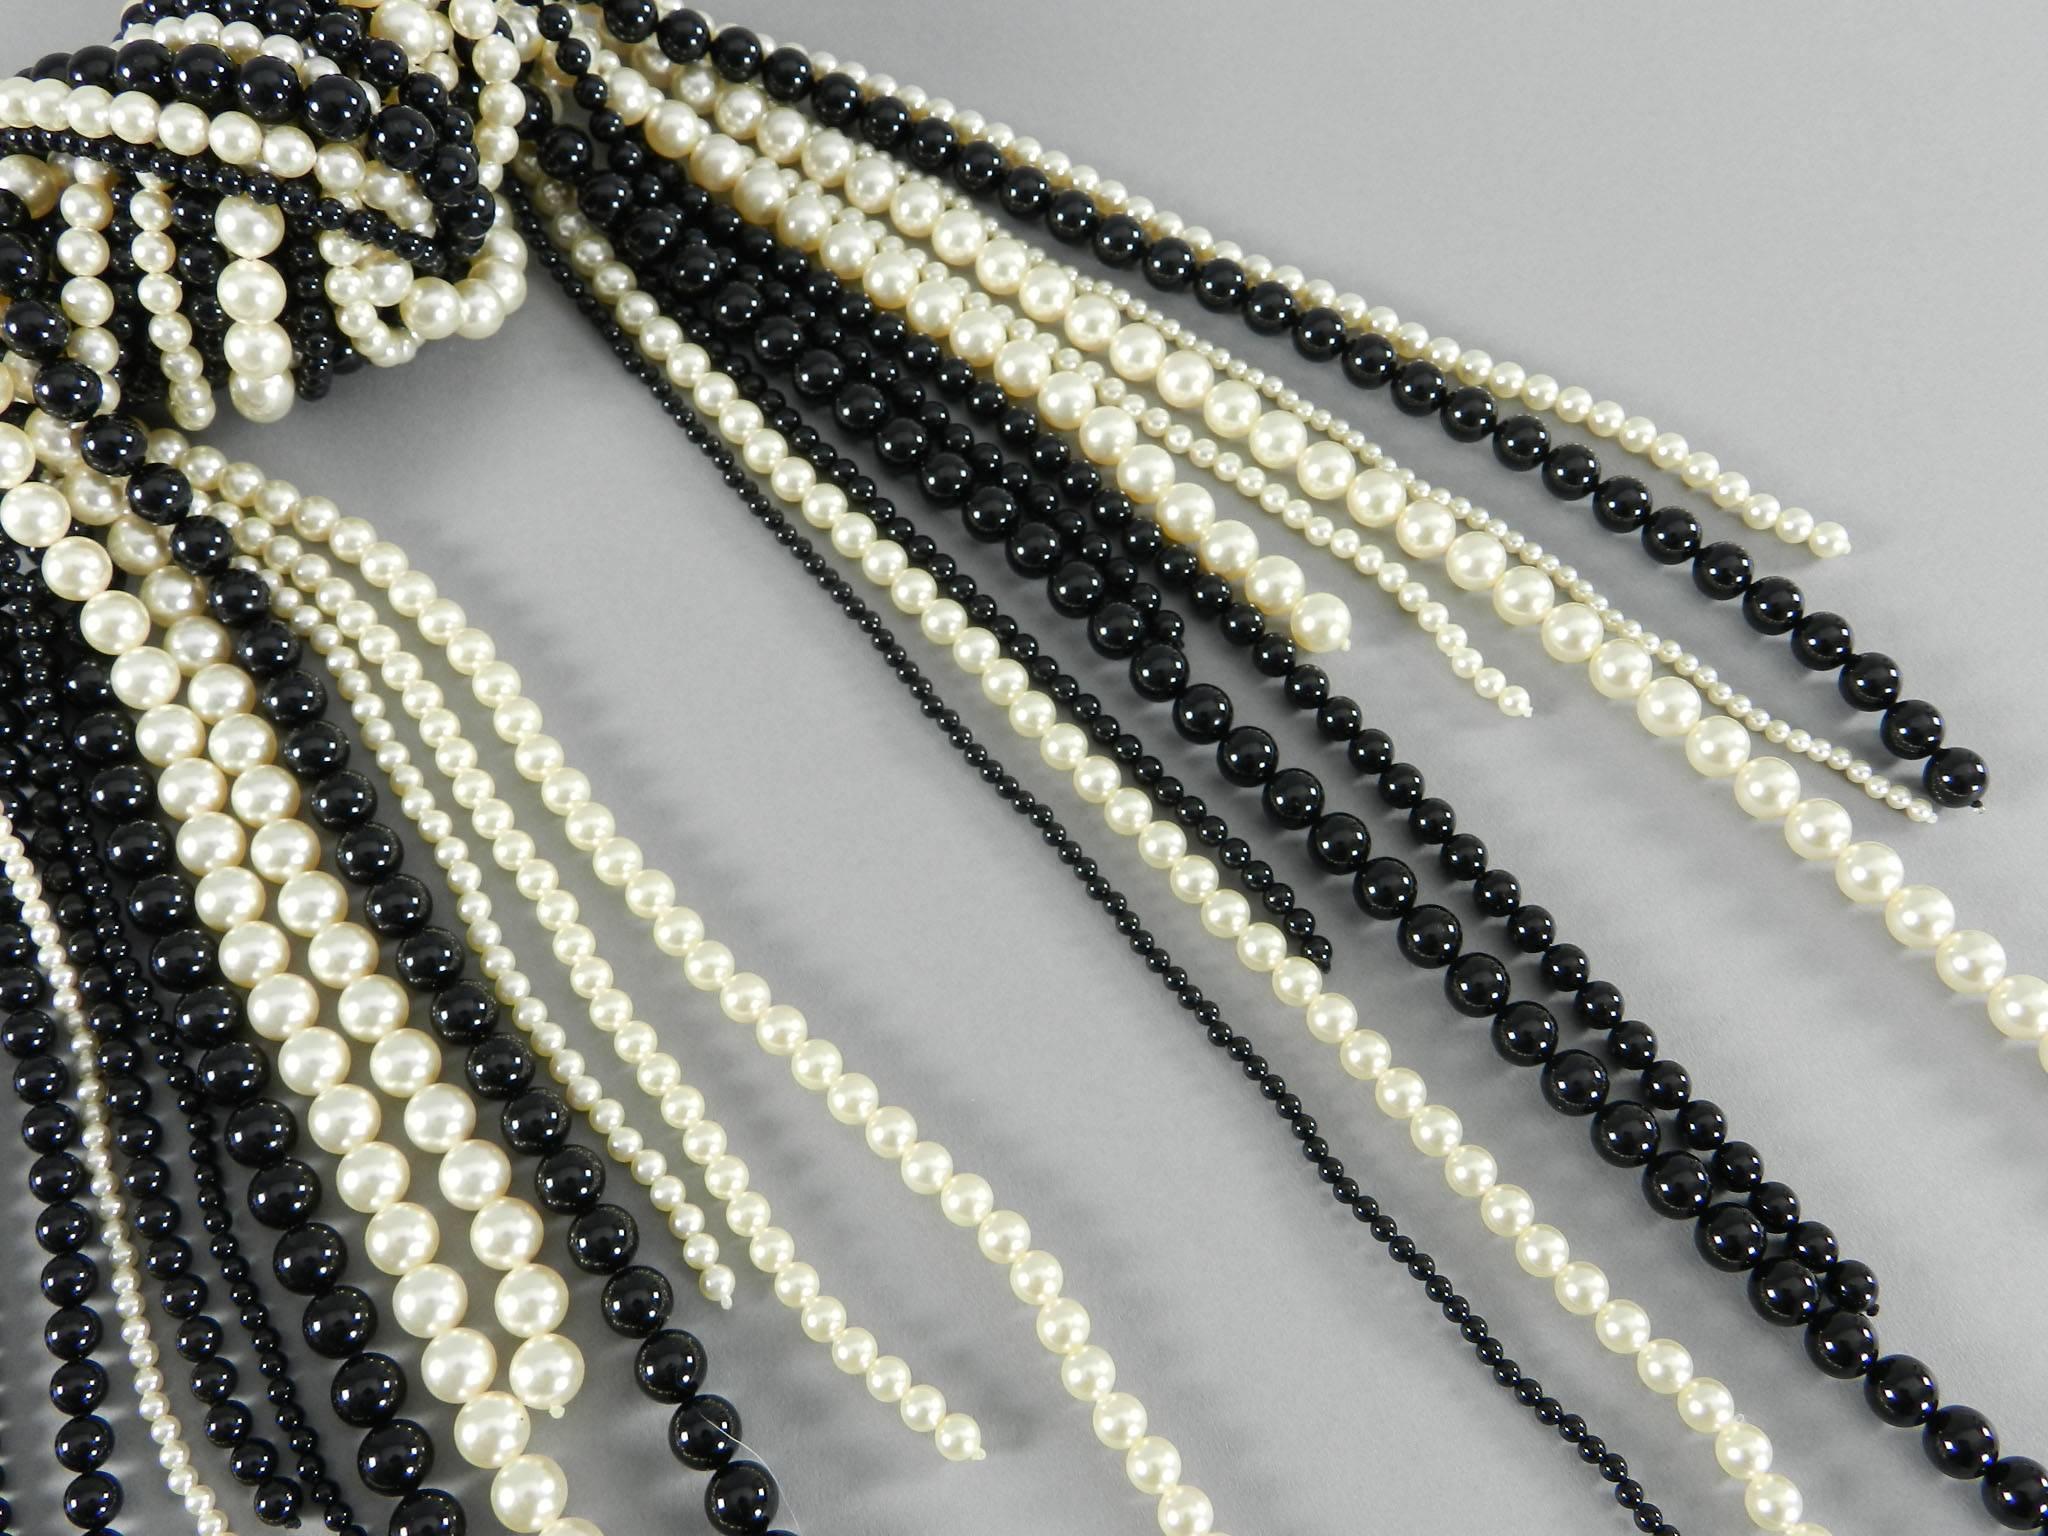 Chanel 14P Runway Black and Pearl Beaded Statement Necklace $10k+ 3